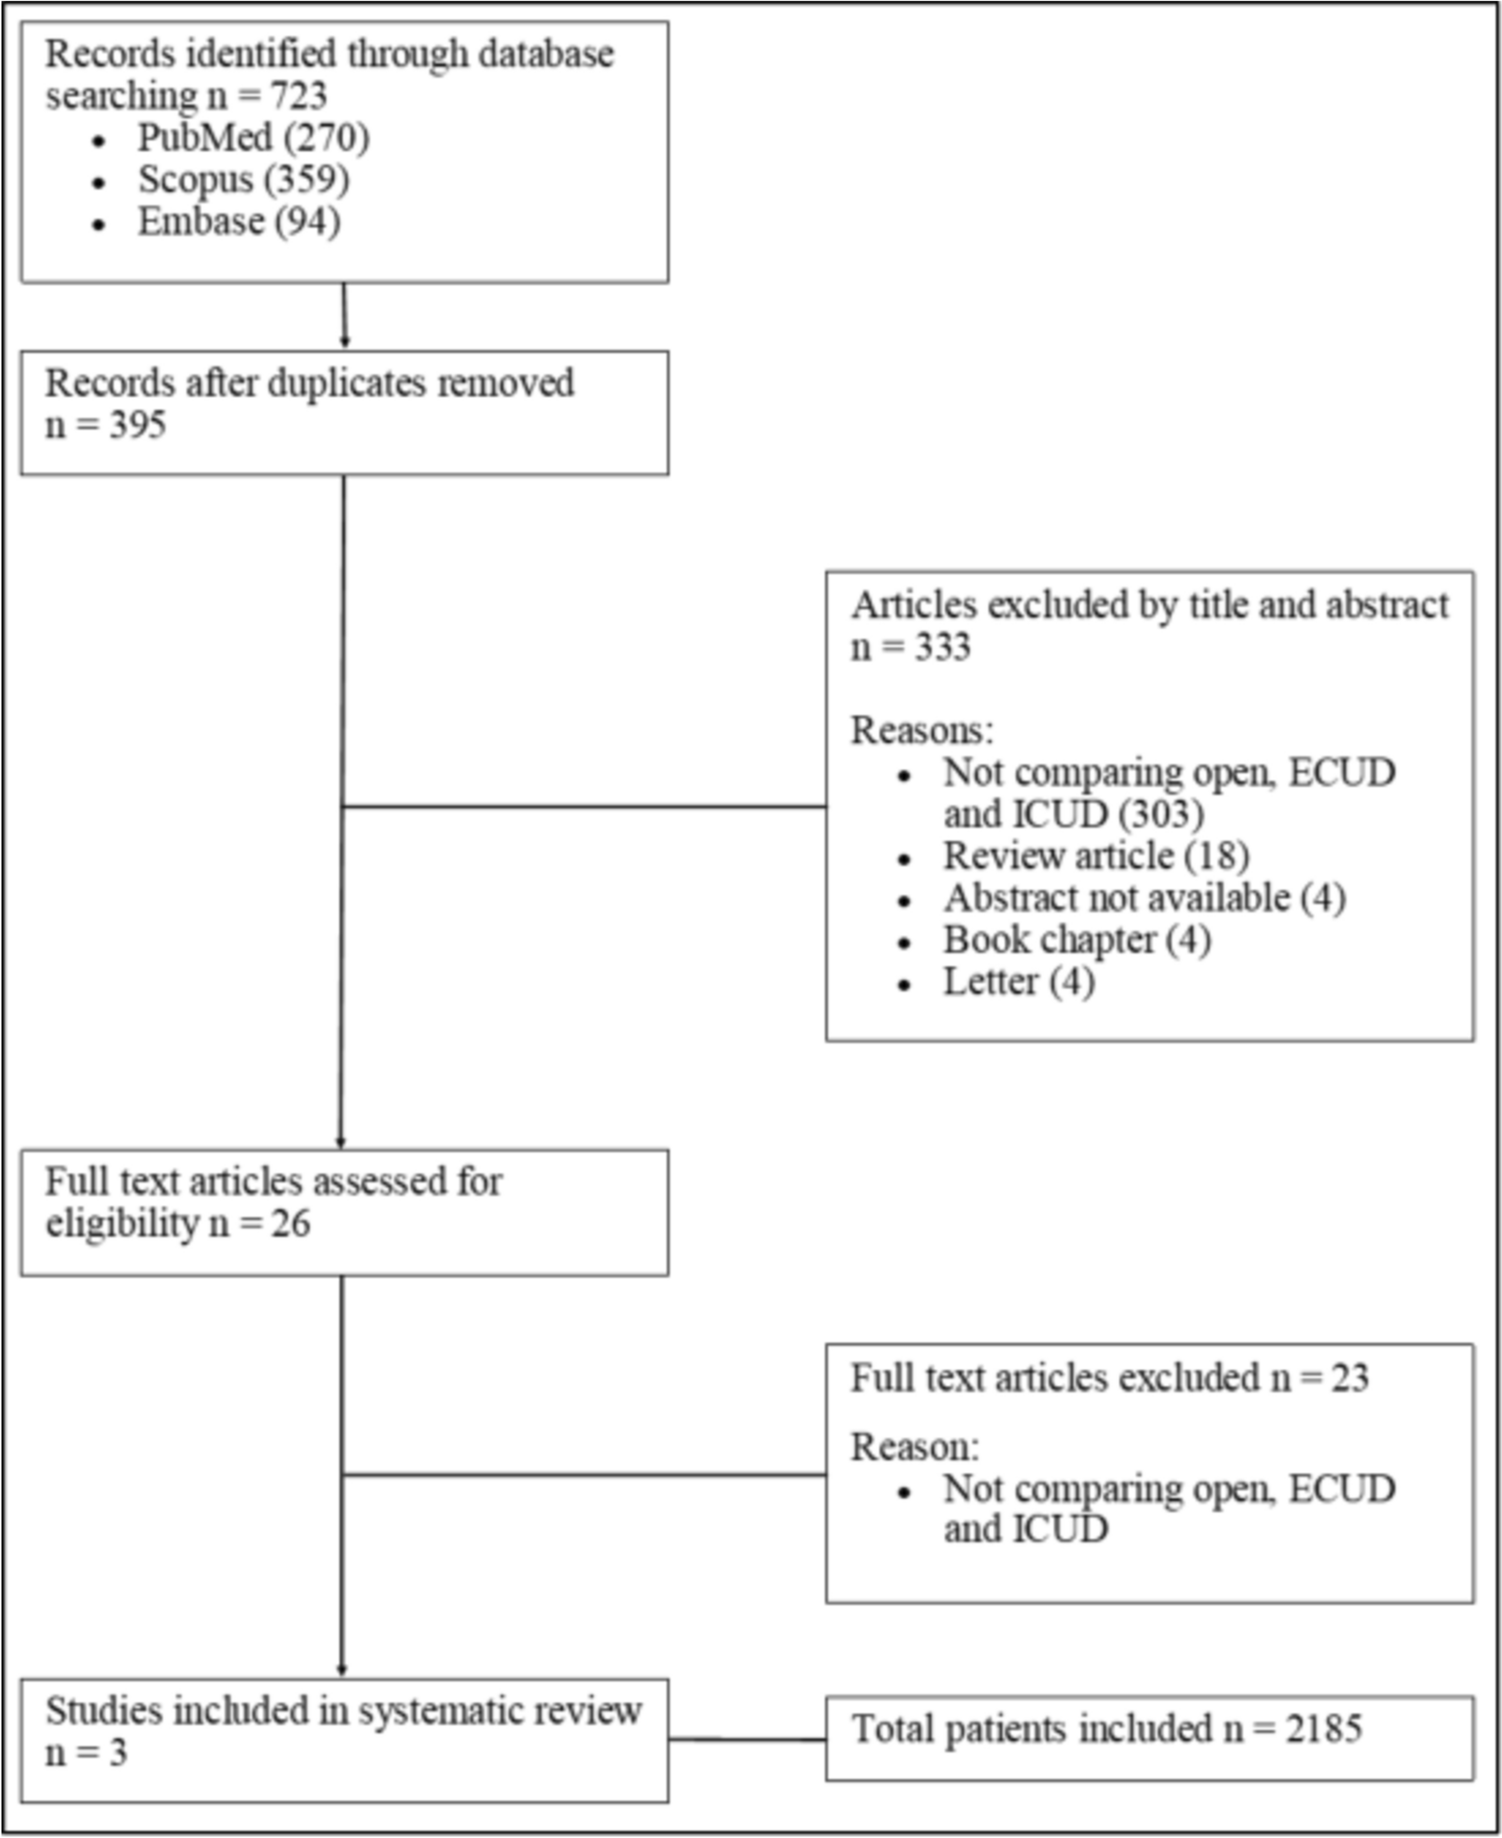 Systematic review comparing uretero-enteric stricture rates between open cystectomy with ileal conduit, robotic cystectomy with extra-corporeal ileal conduit and robotic cystectomy with intra corporeal ileal conduit formation